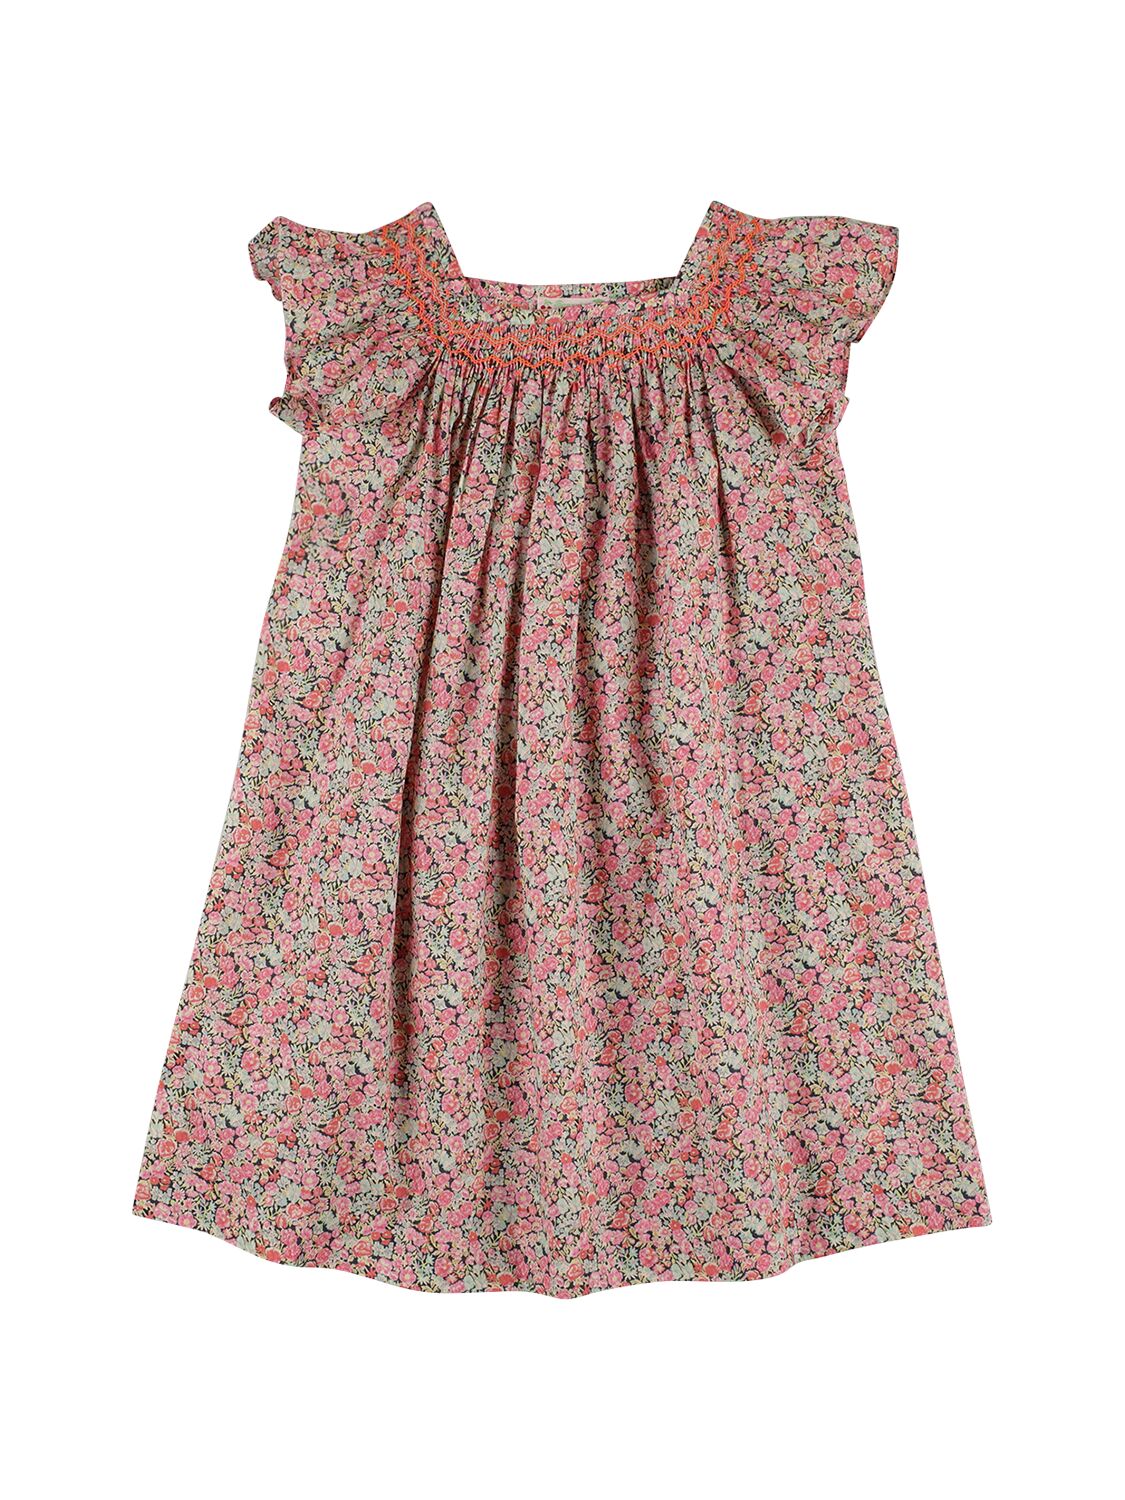 Bonpoint Kids' Printed Cotton Dress W/ Embroidery In 멀티컬러